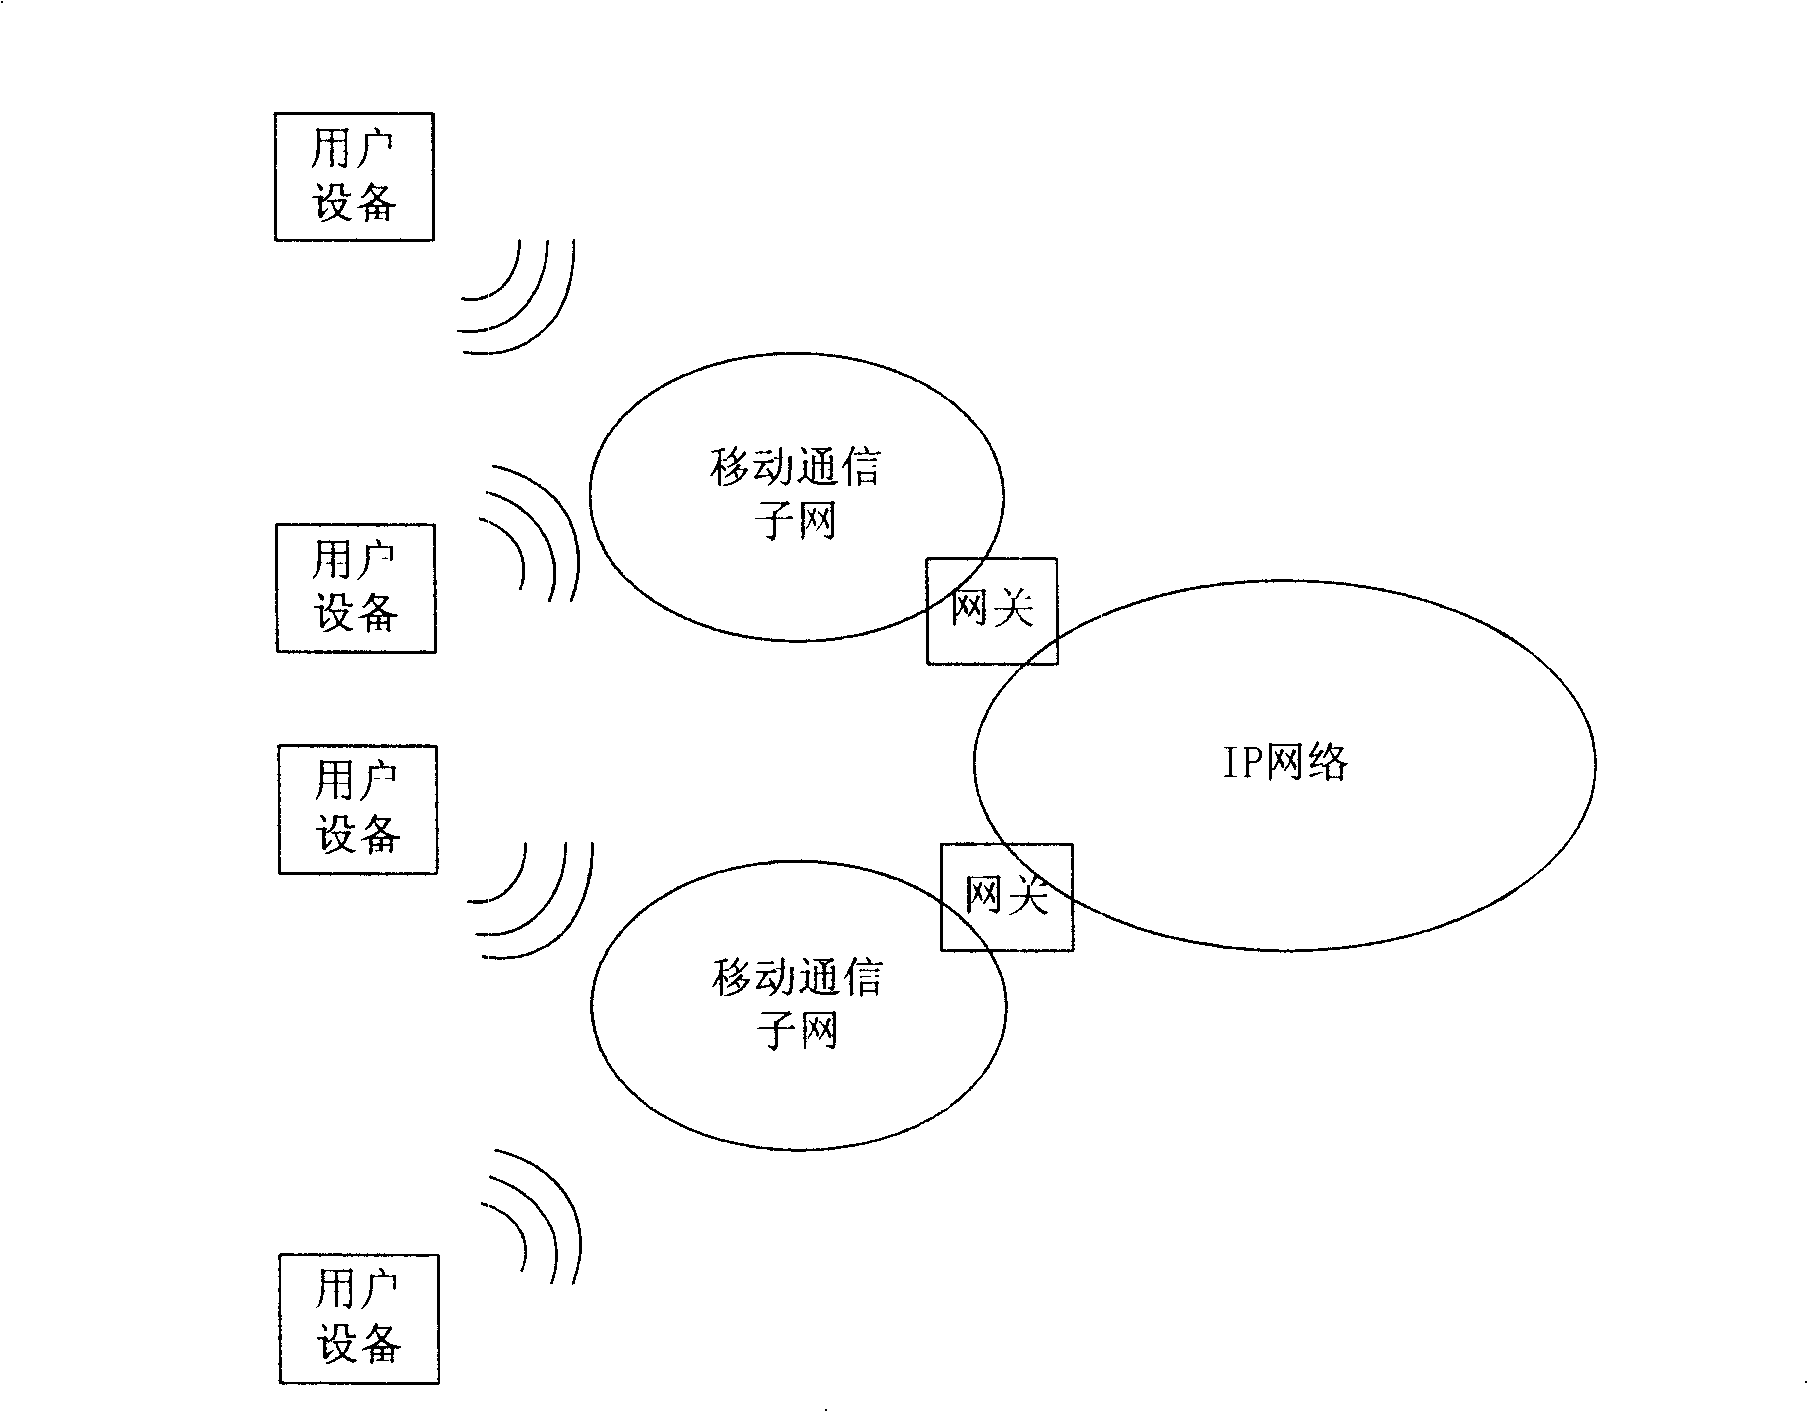 Method for implementing multimedia multicast service of mobile communications network